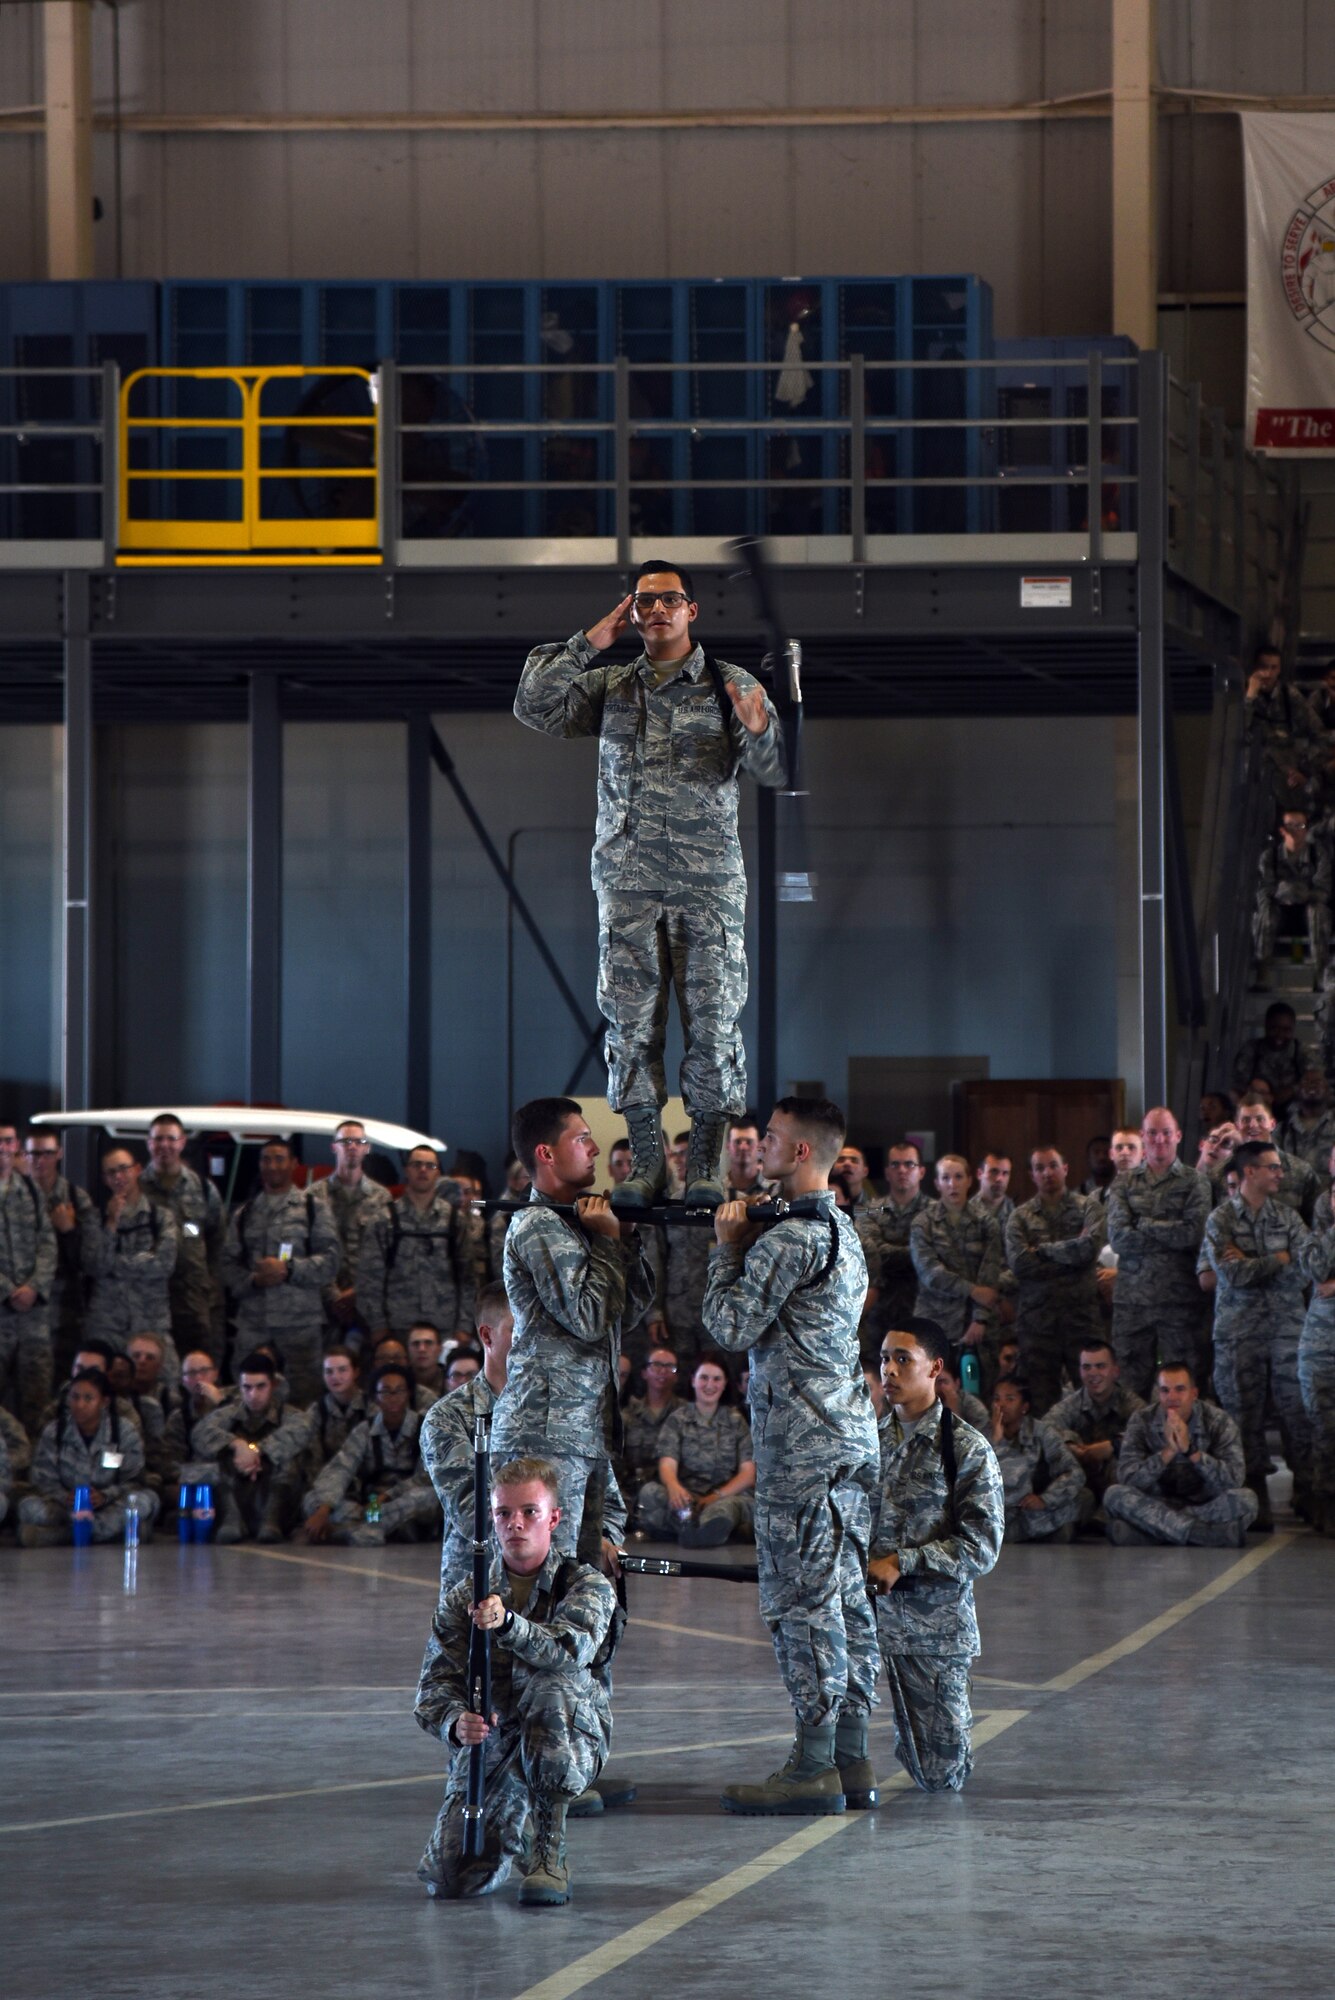 U.S. Air Force Airman 1st Class Erin Portillo, 316th Training Squadron trainee, salutes at the end of his and his team’s exhibition drill portion of the 17th Training Group drill competition at the Louis F. Garland Department of Defense Fire Academy on Goodfellow Air Force Base, Texas, June 22, 2018. The 316th TRS won the exhibition portion and placed first overall at the drill competition. (U.S. Air Force photo by Staff Sgt. Joshua Edwards/Released)